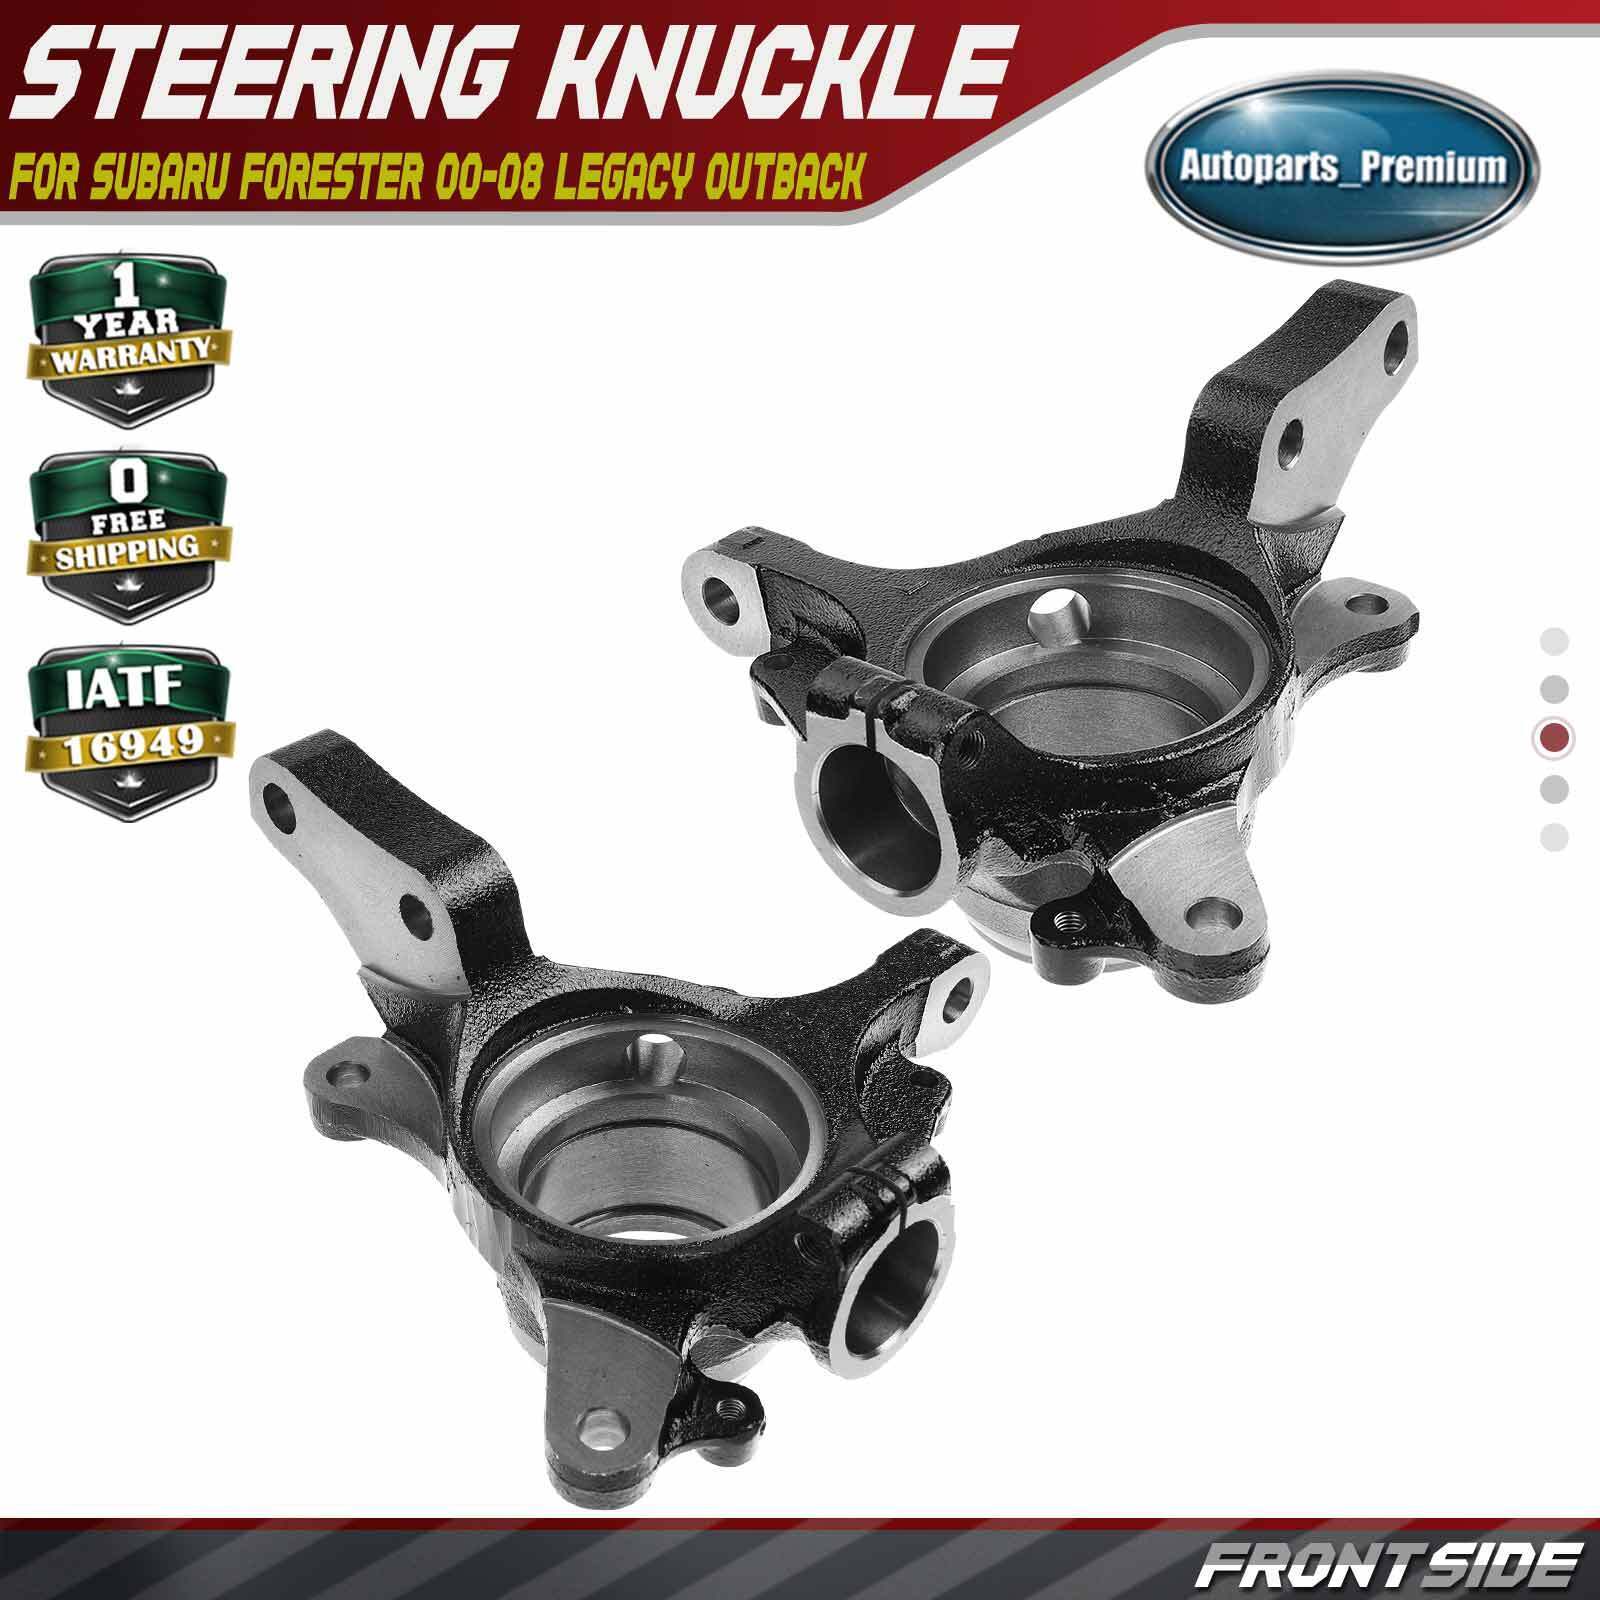 2x Steering Knuckle for Subaru Forester 00-08 Legacy Outback Front Left & Right